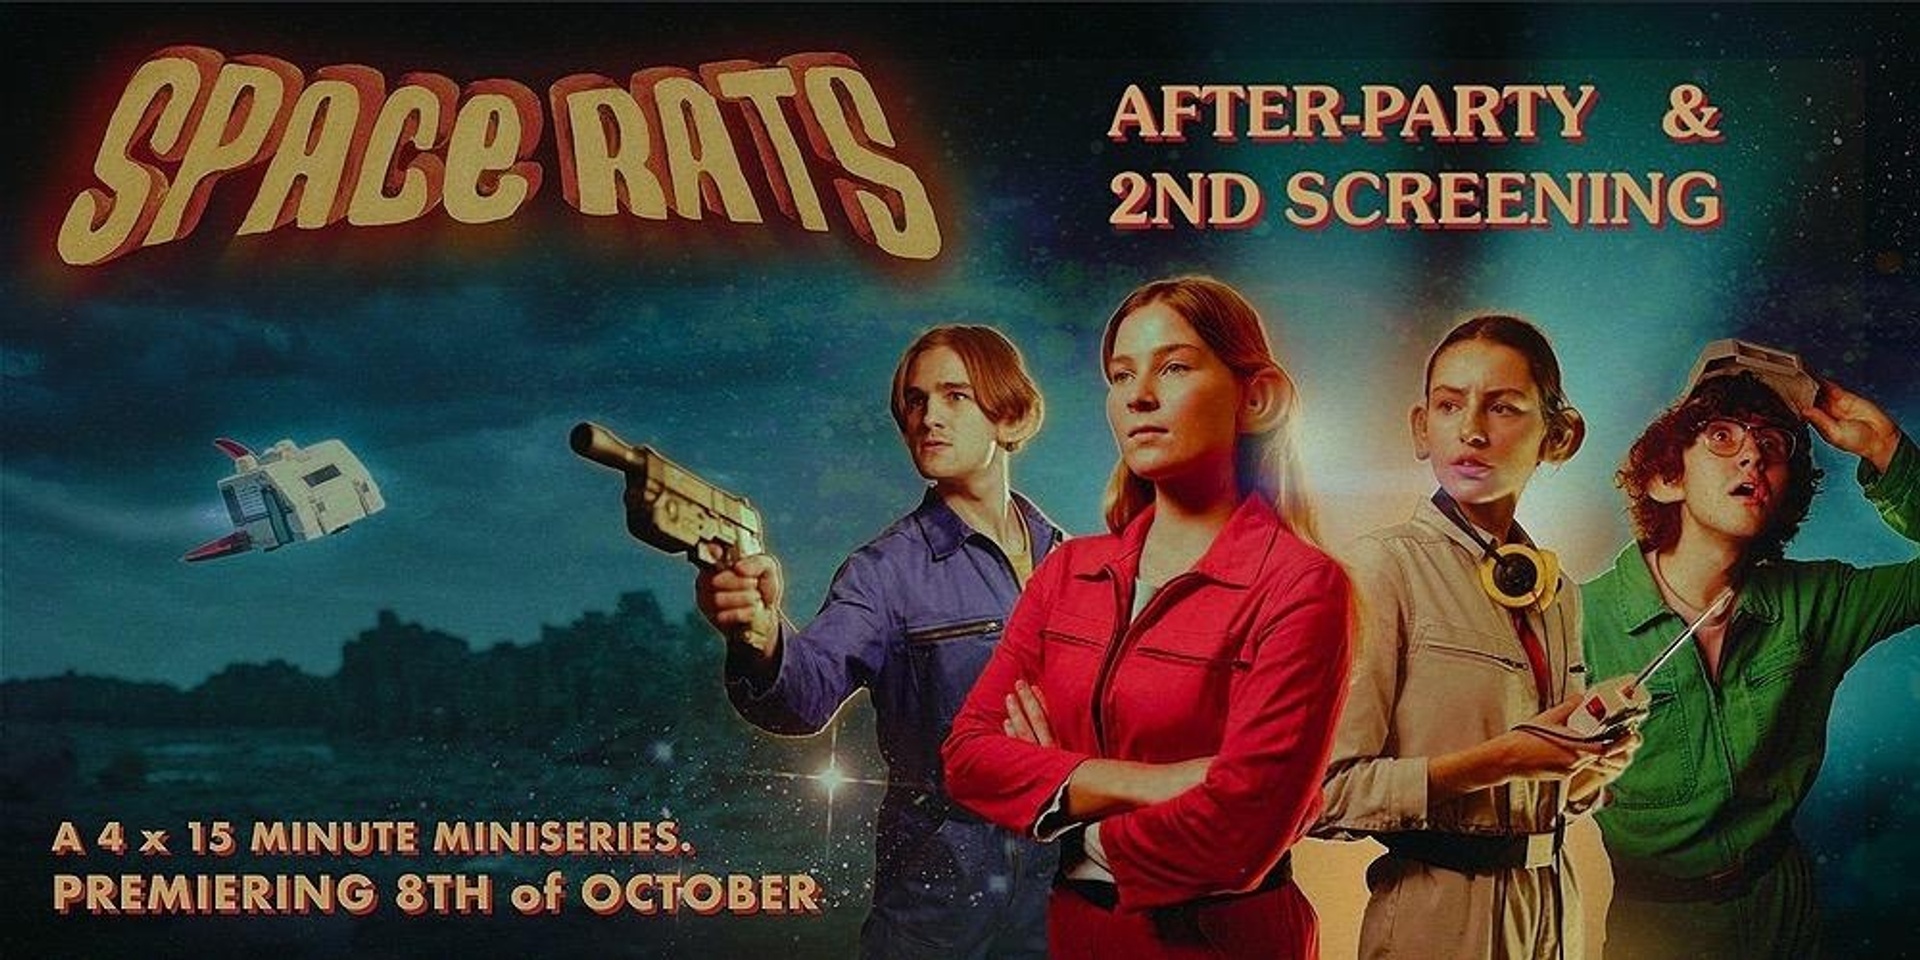 Space Rats - 2nd SCREENING & AFTERPARTY  